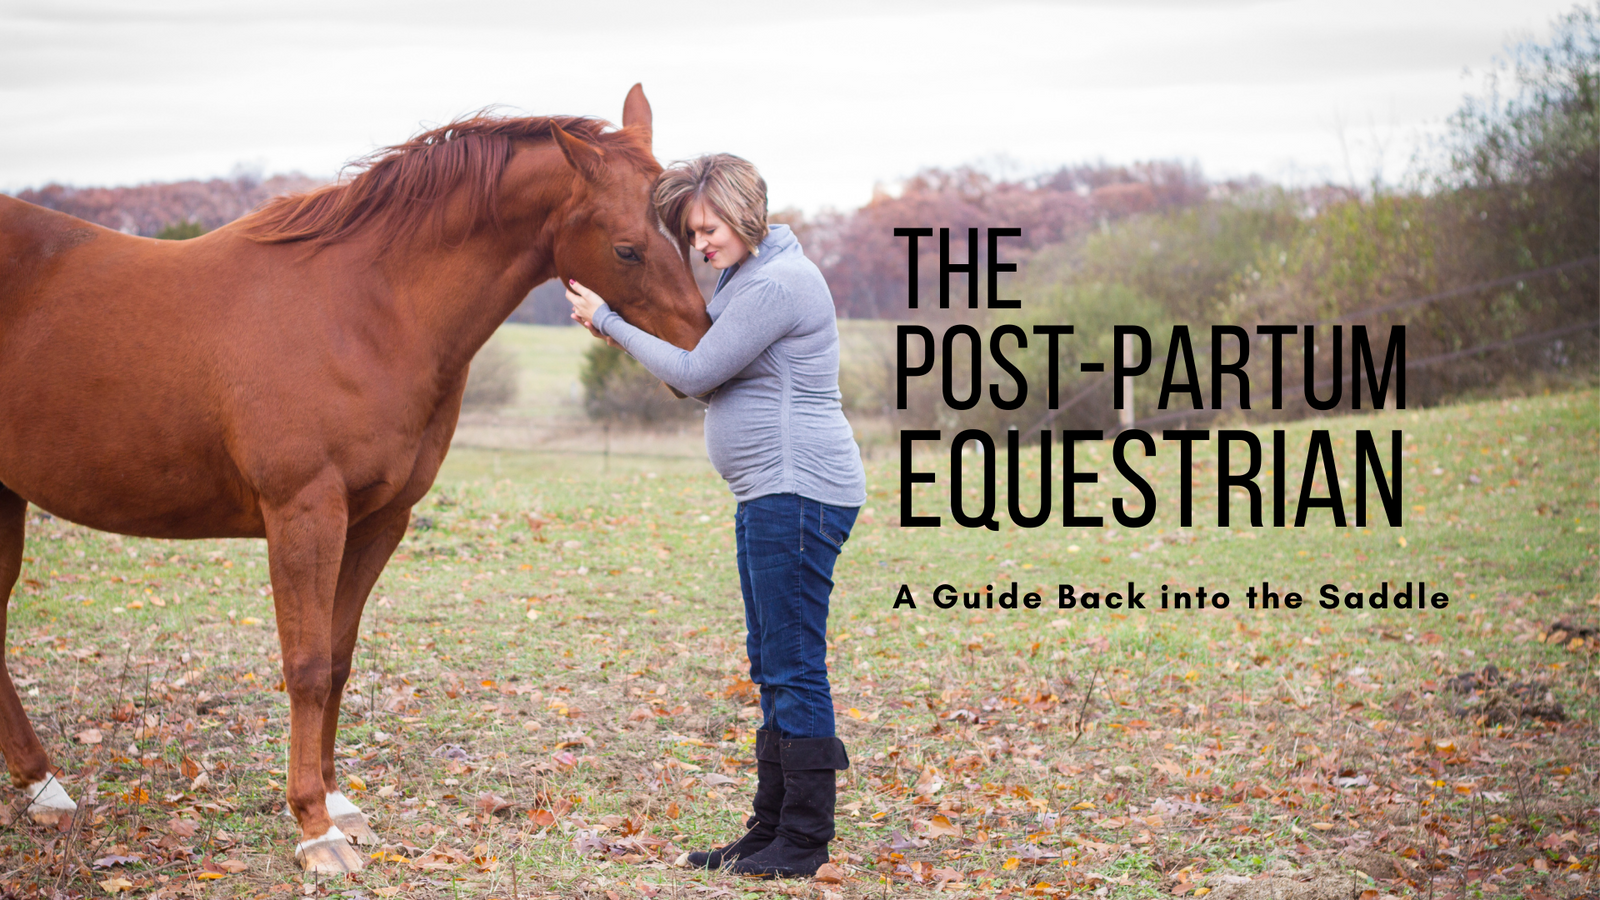 The Post-Partum Equestrian: A Guide Back into the Saddle